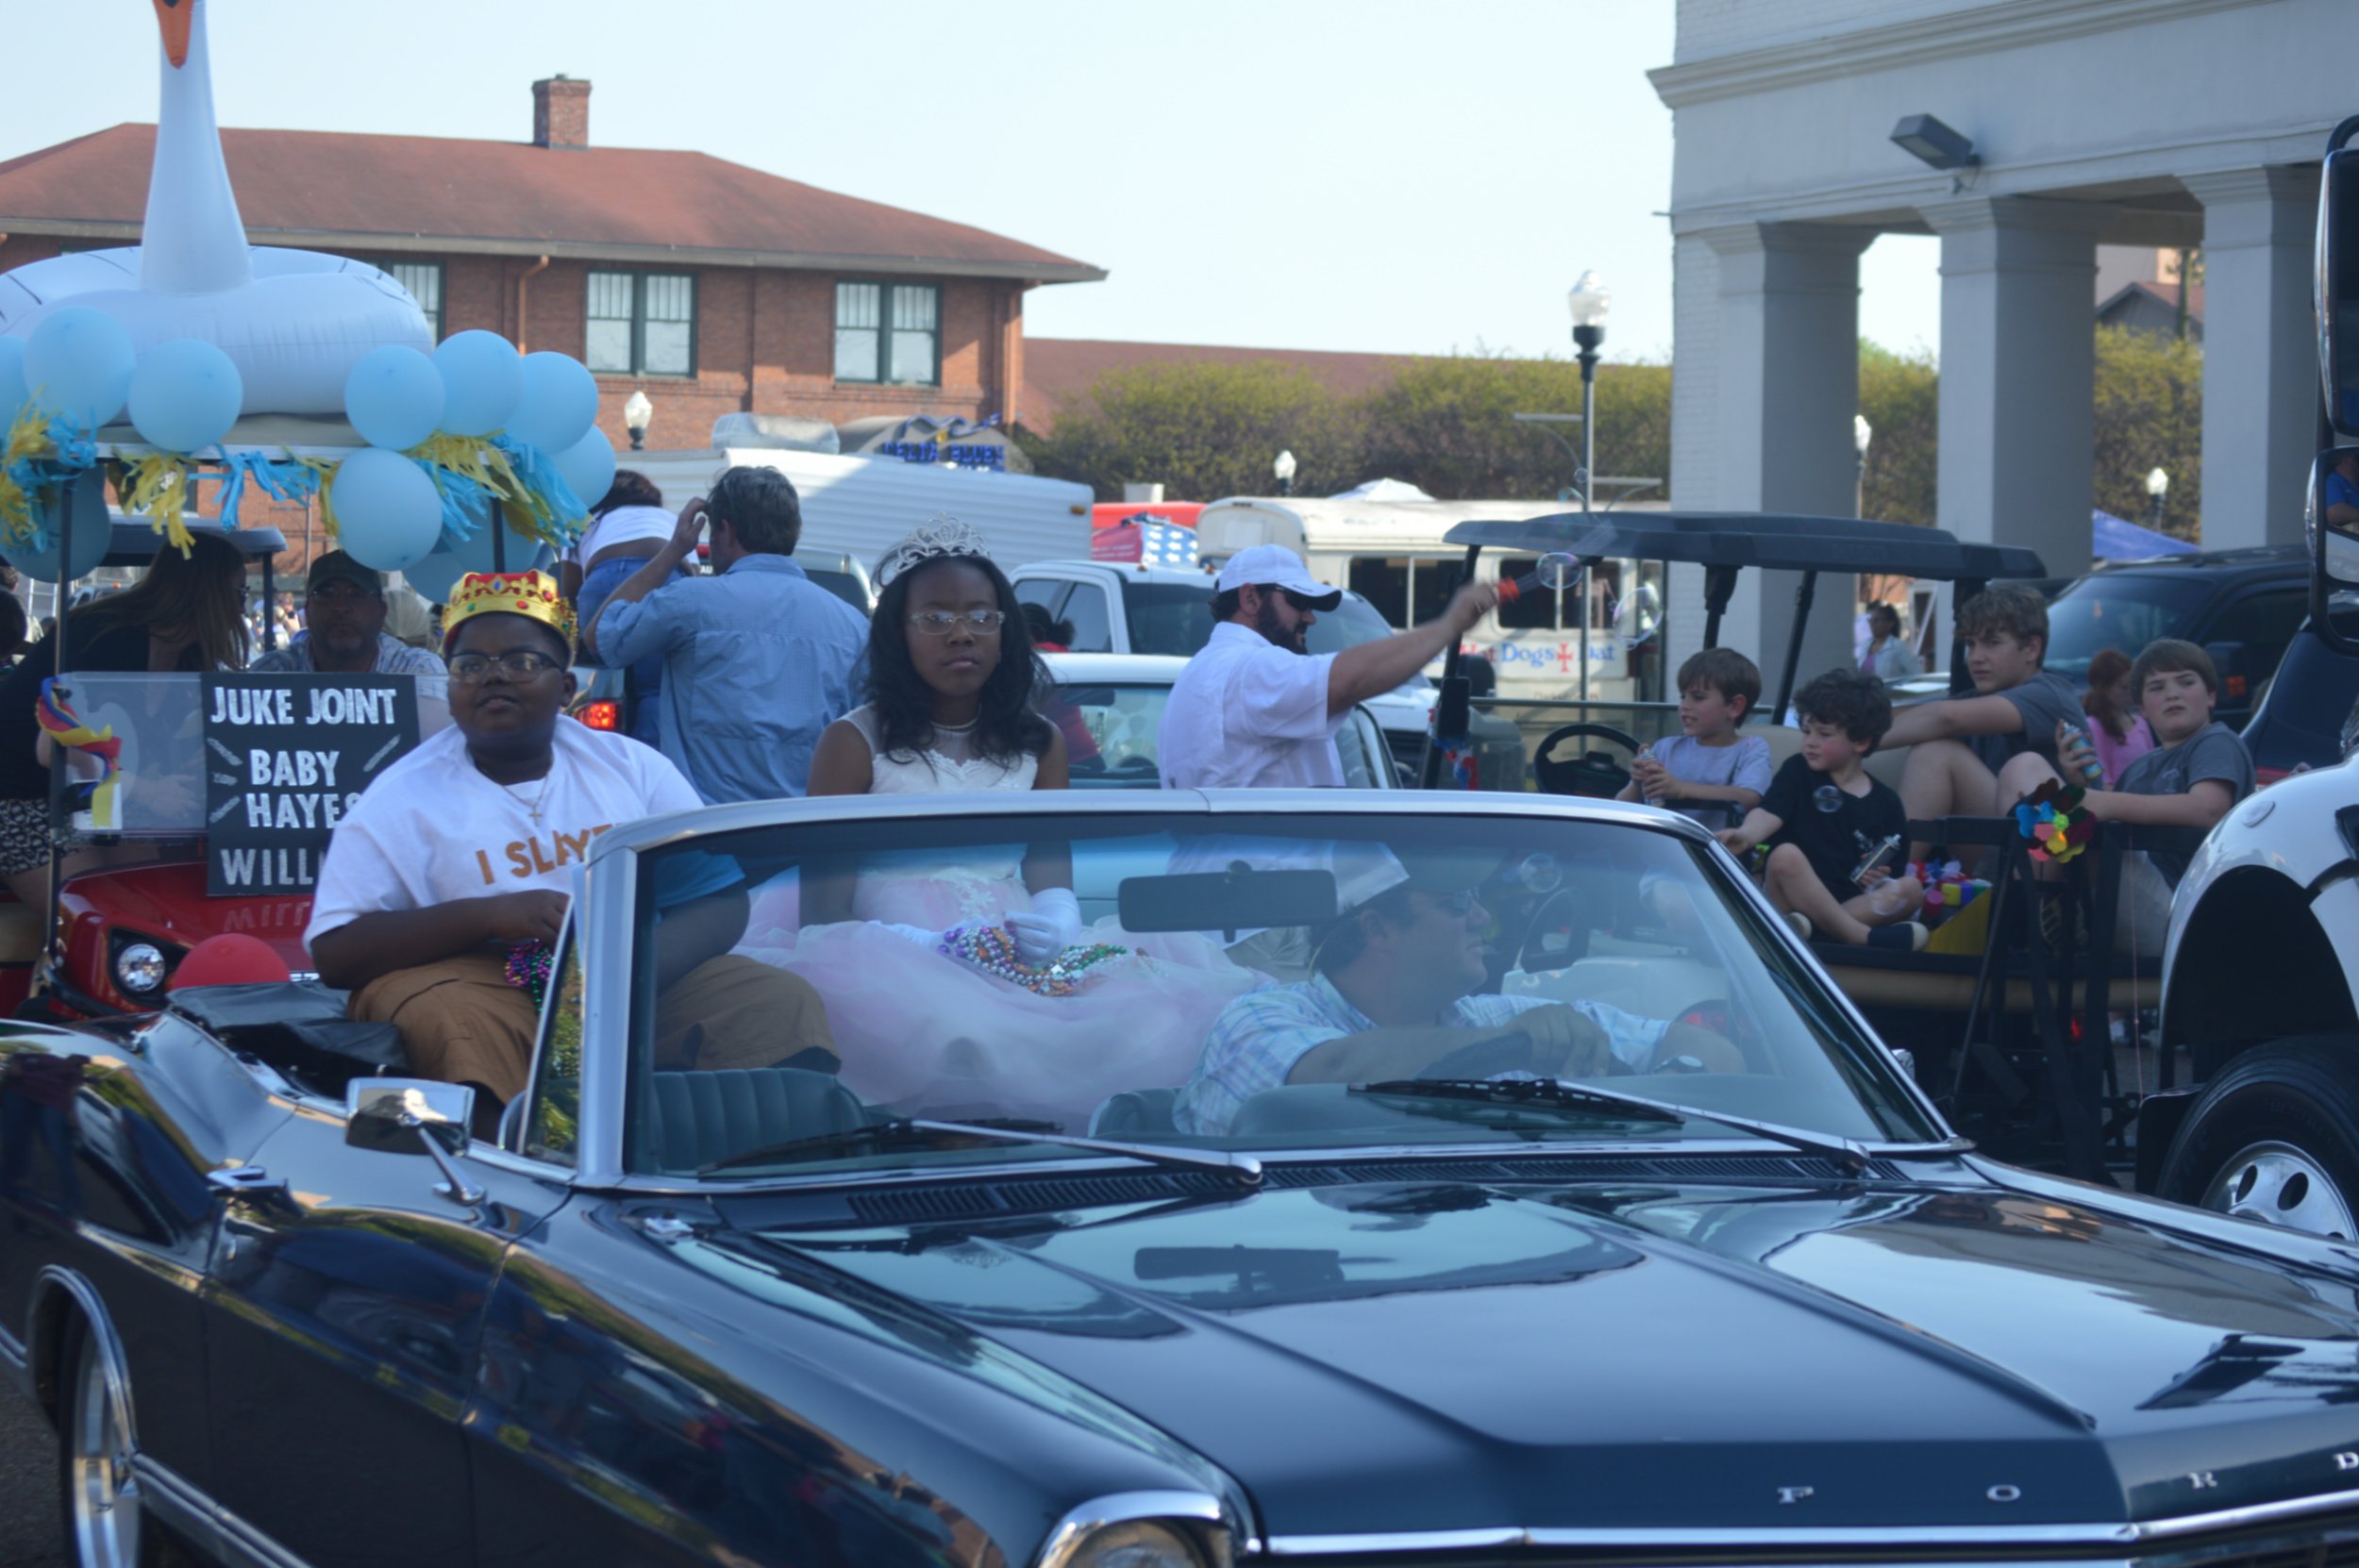 Kicking Off The Juke Joint Festival With A Parade And A Friday Night of Music